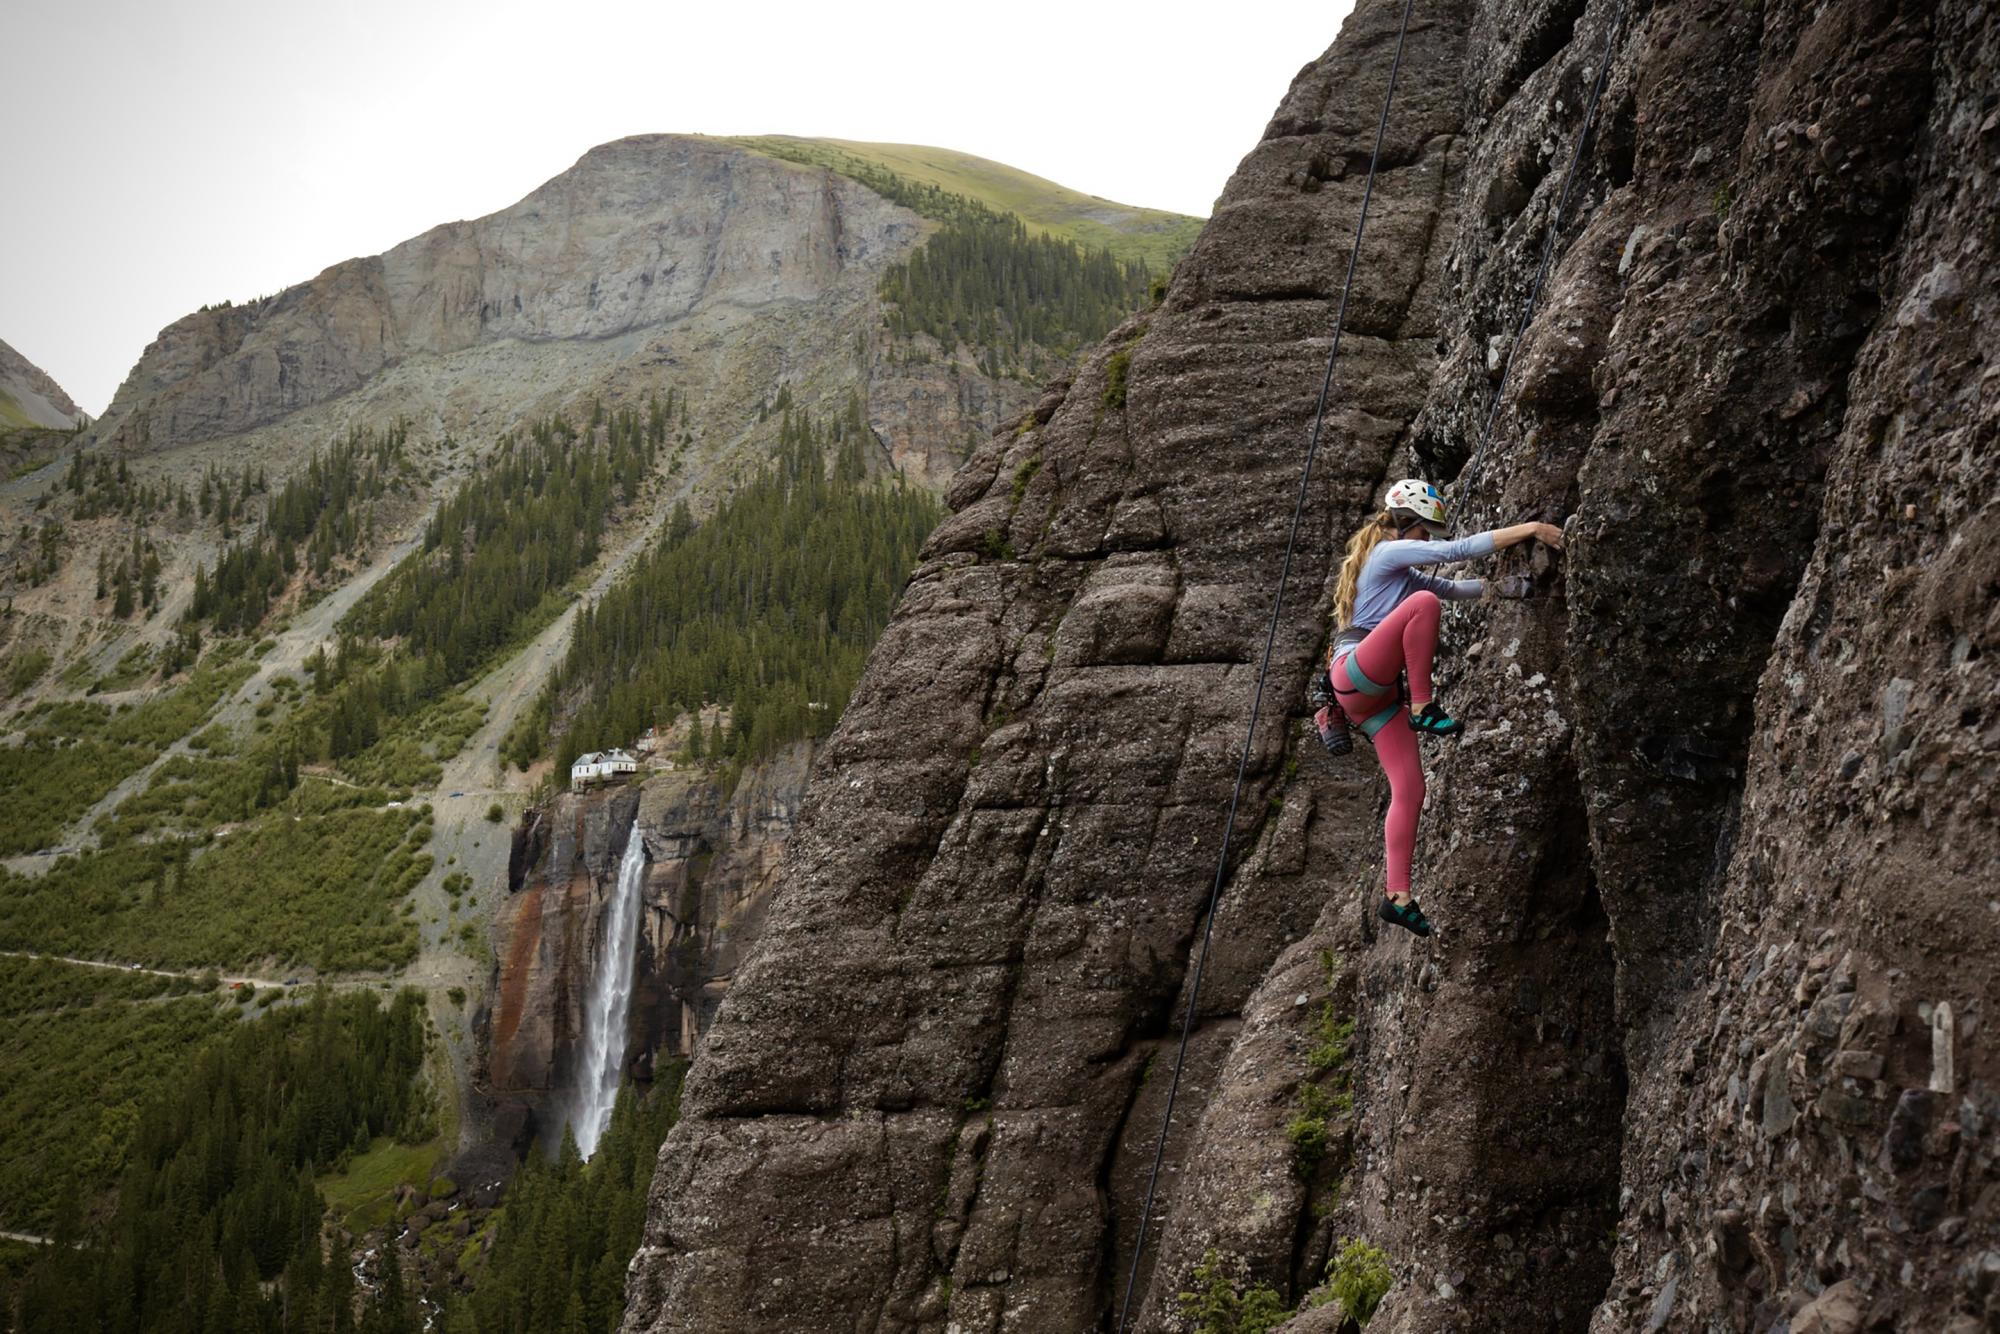 Photo of a person rock climbing by surrounding mountains and waterfall